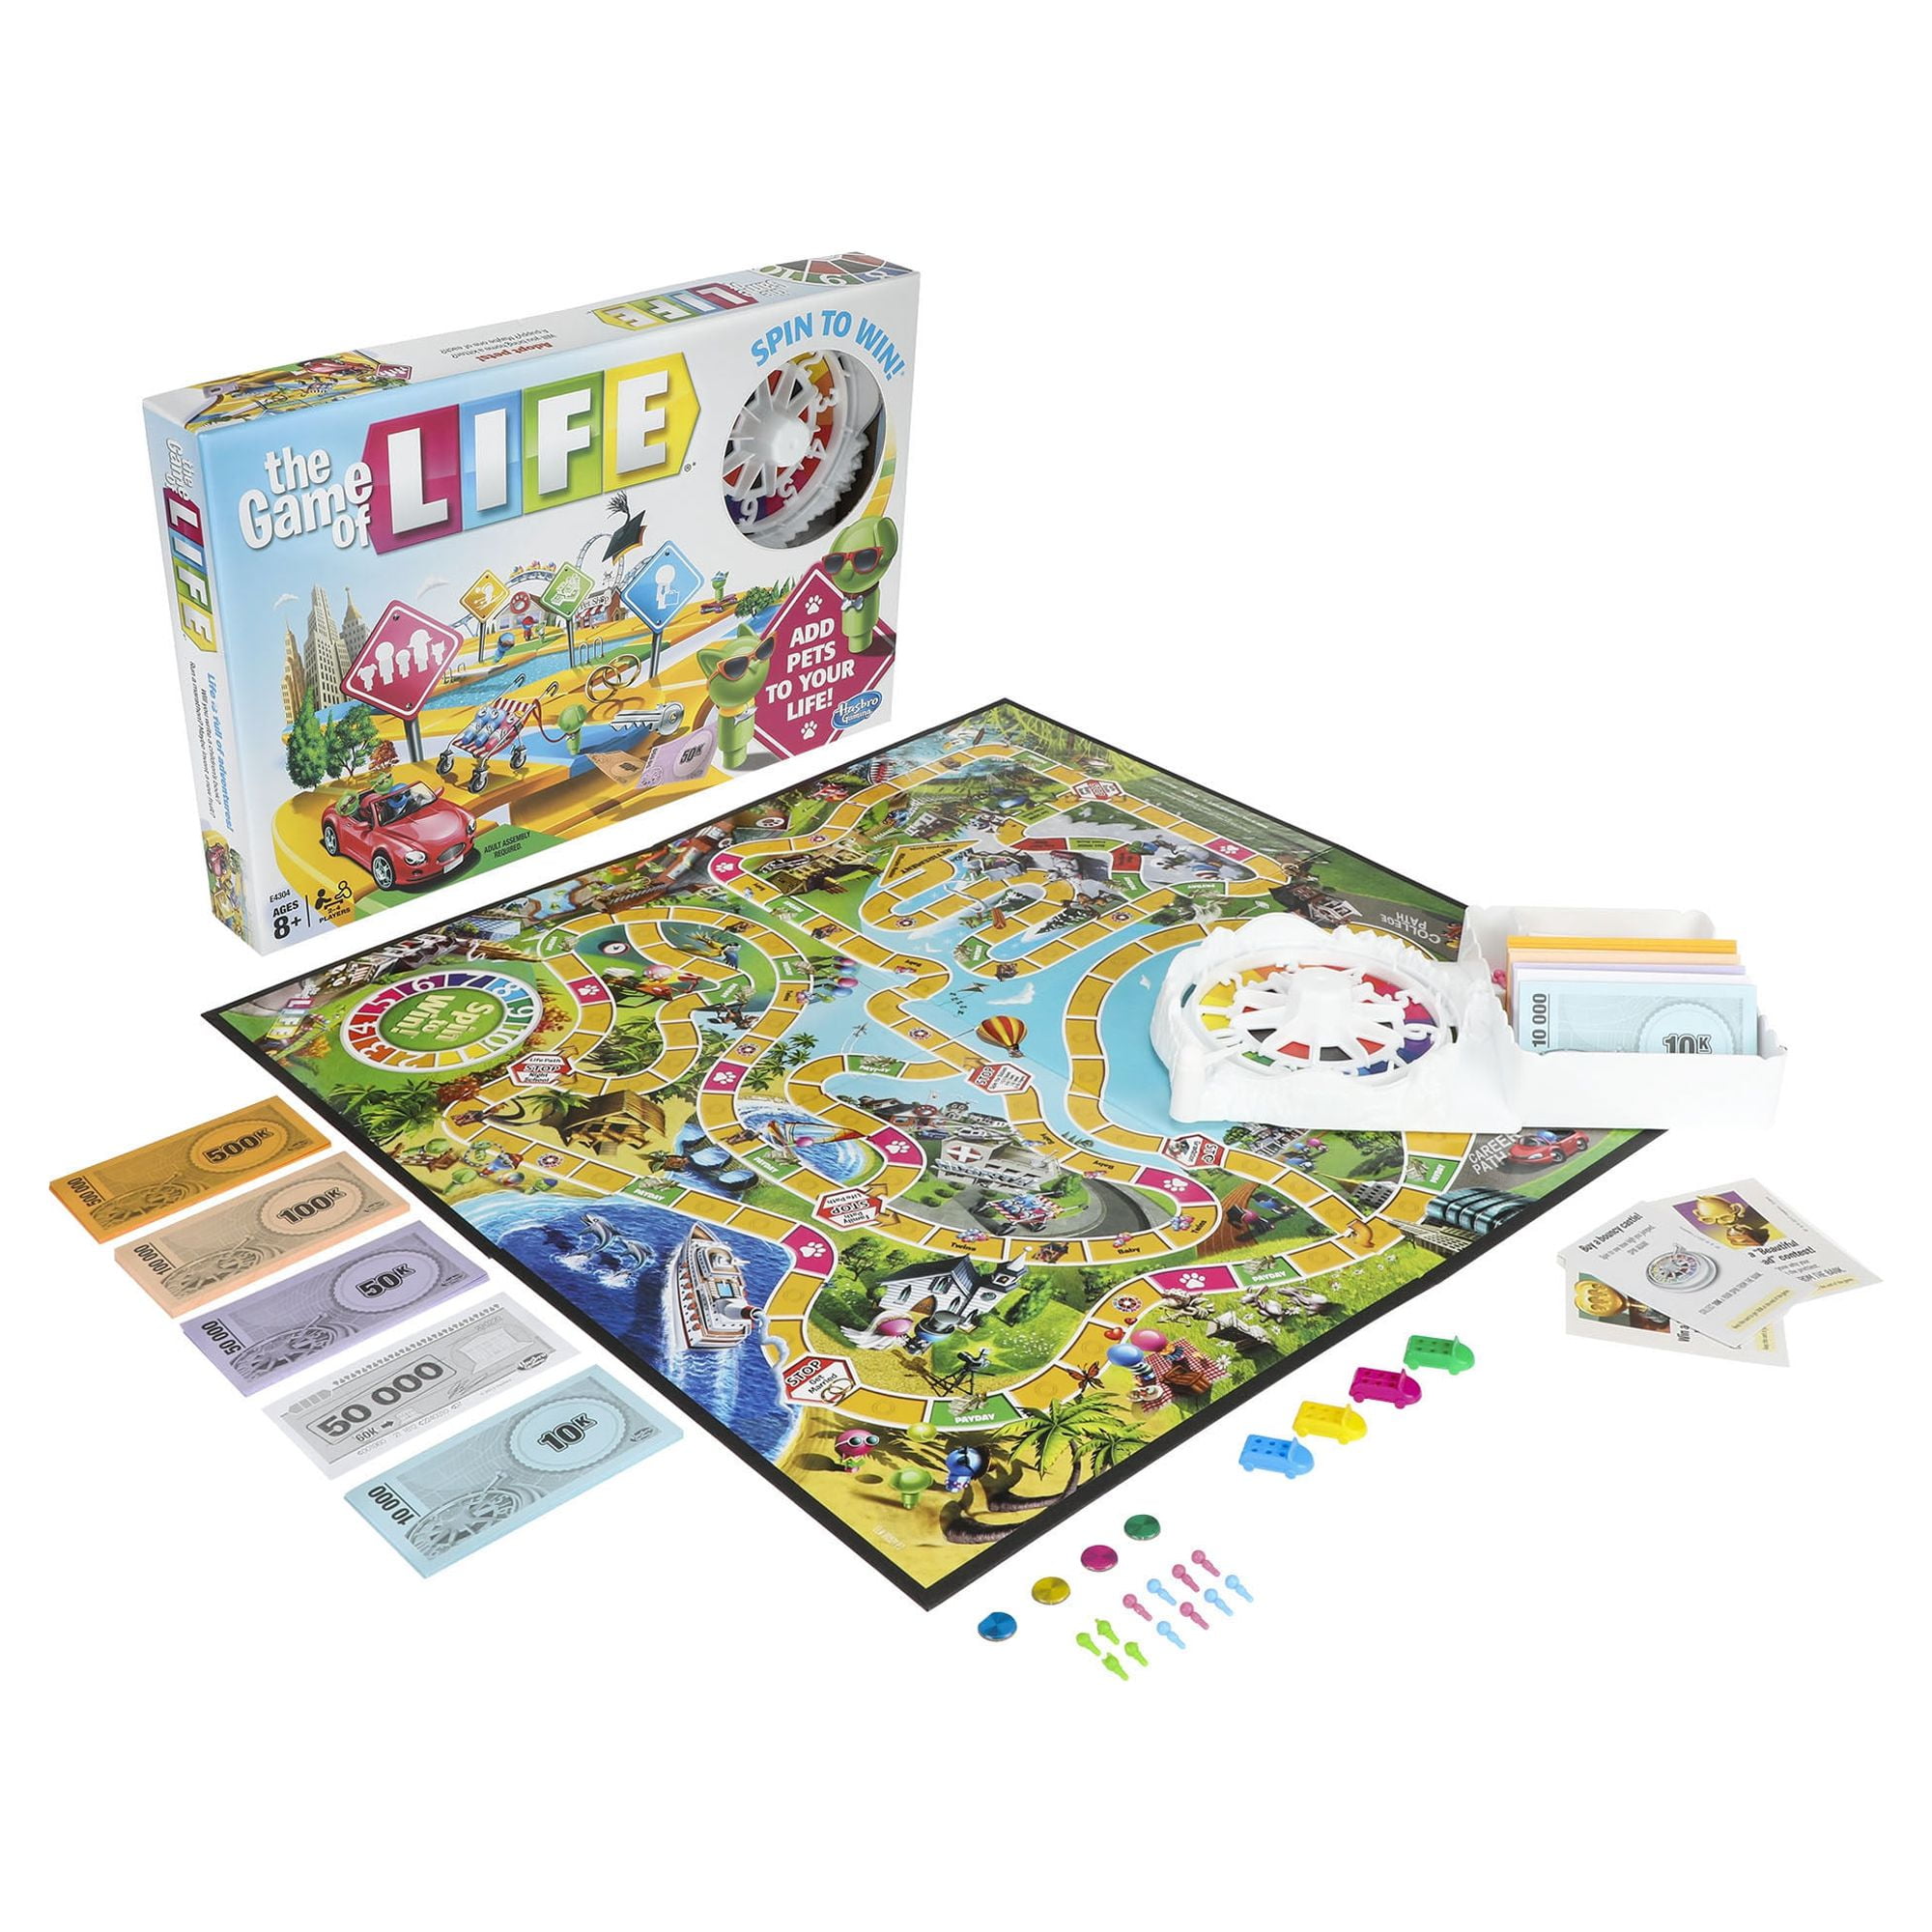 In The Game of Life game players can make their own exciting